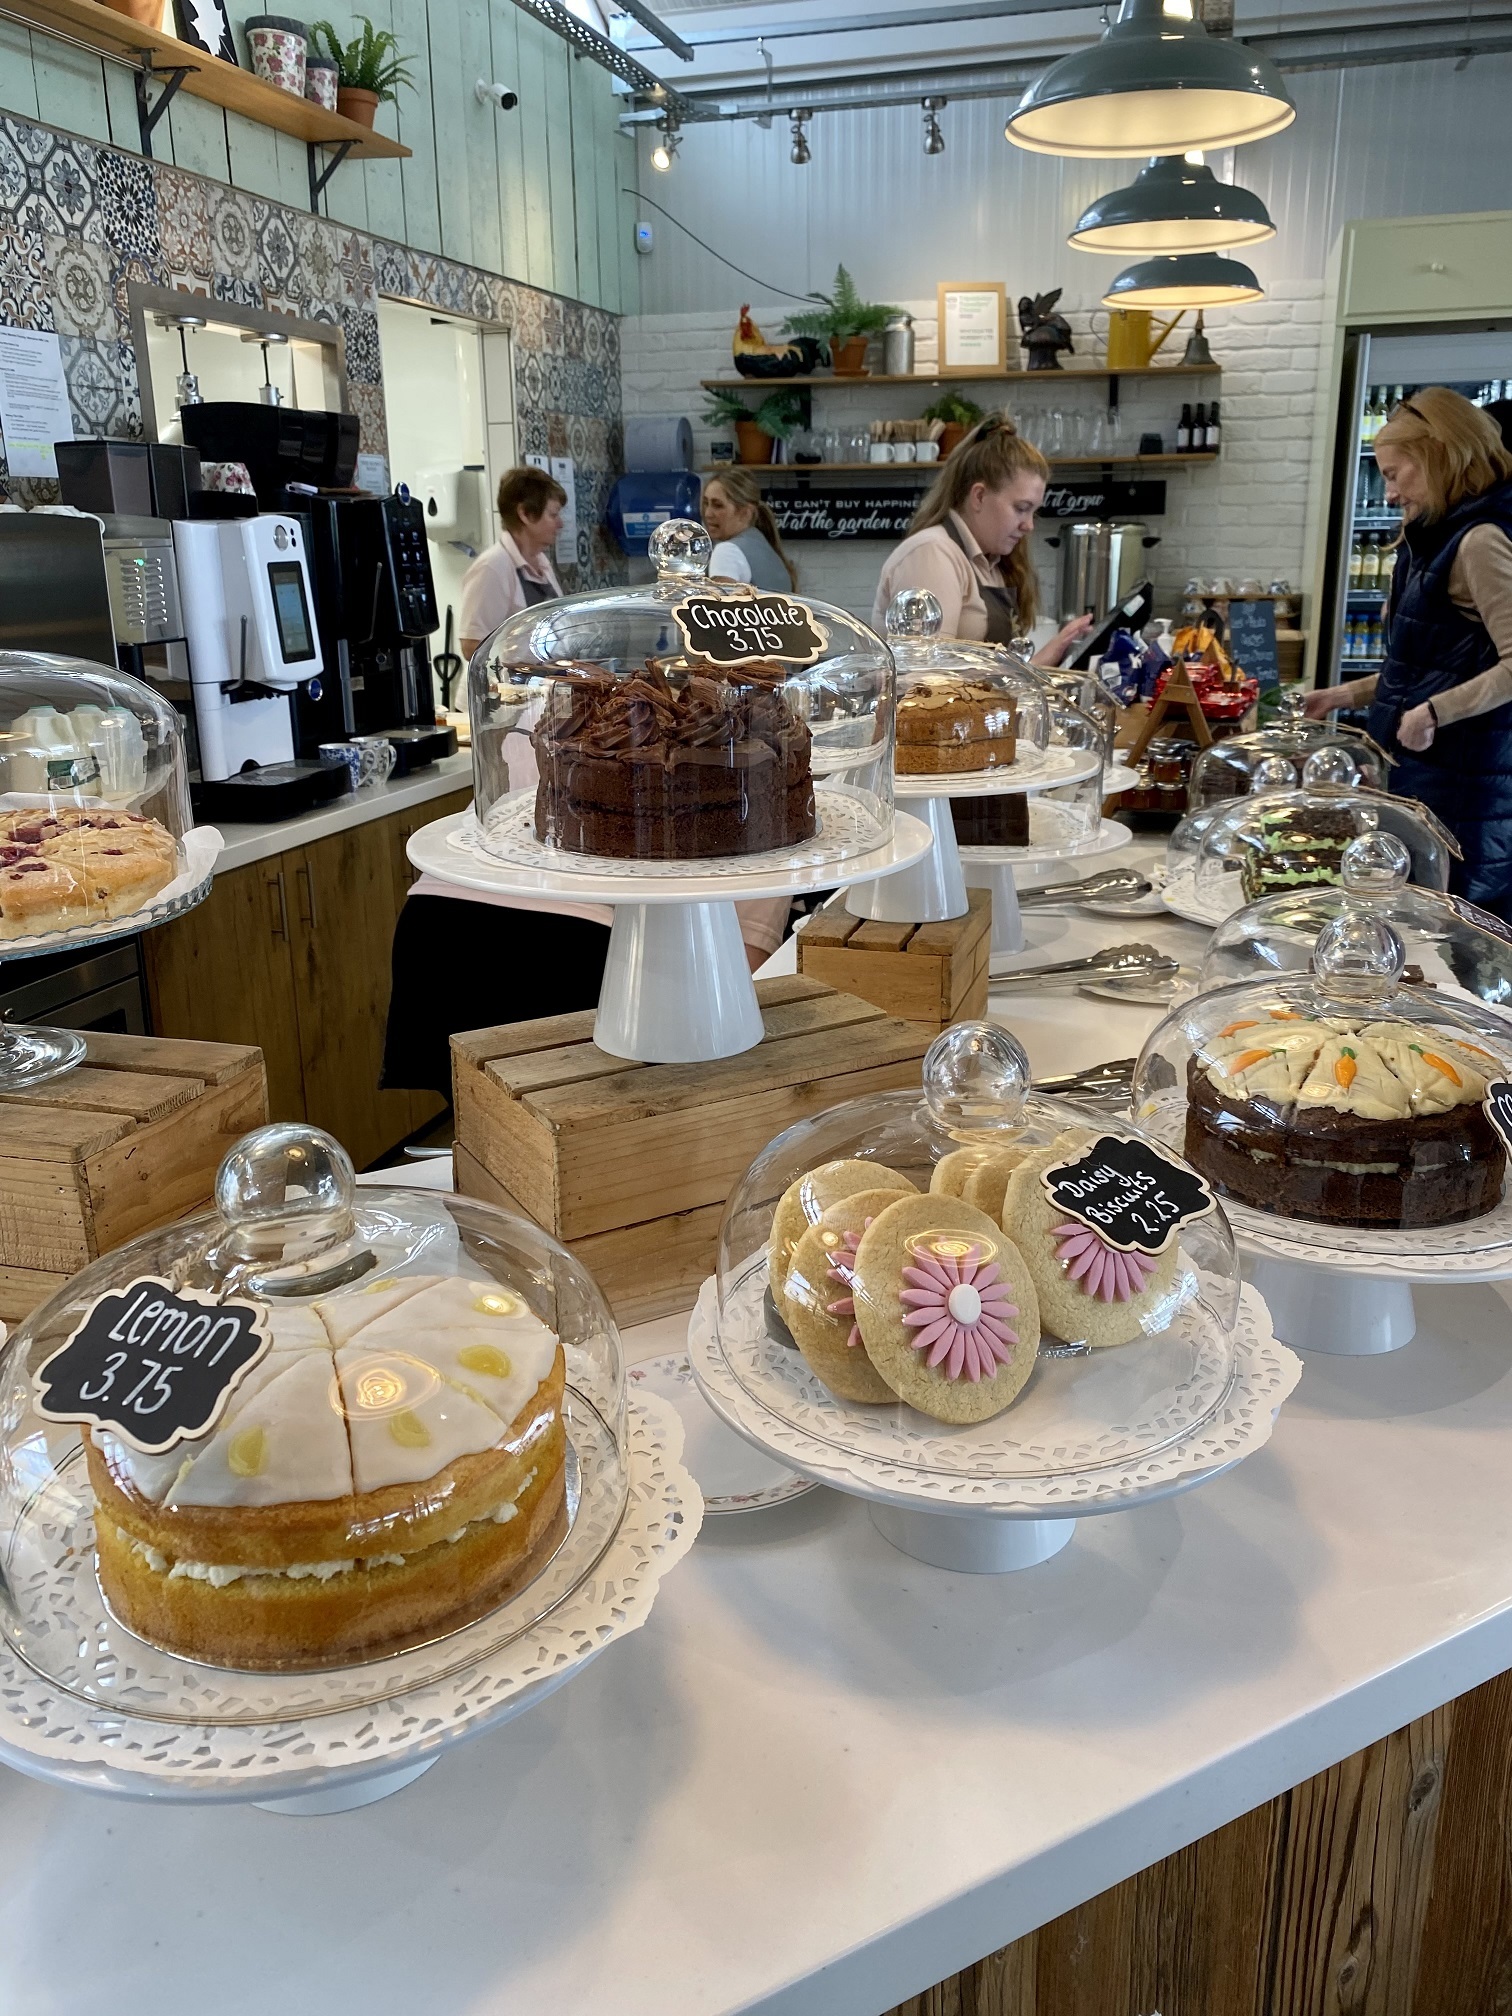 The vast selection of cakes and scones at Whitegates Nursery Cafe